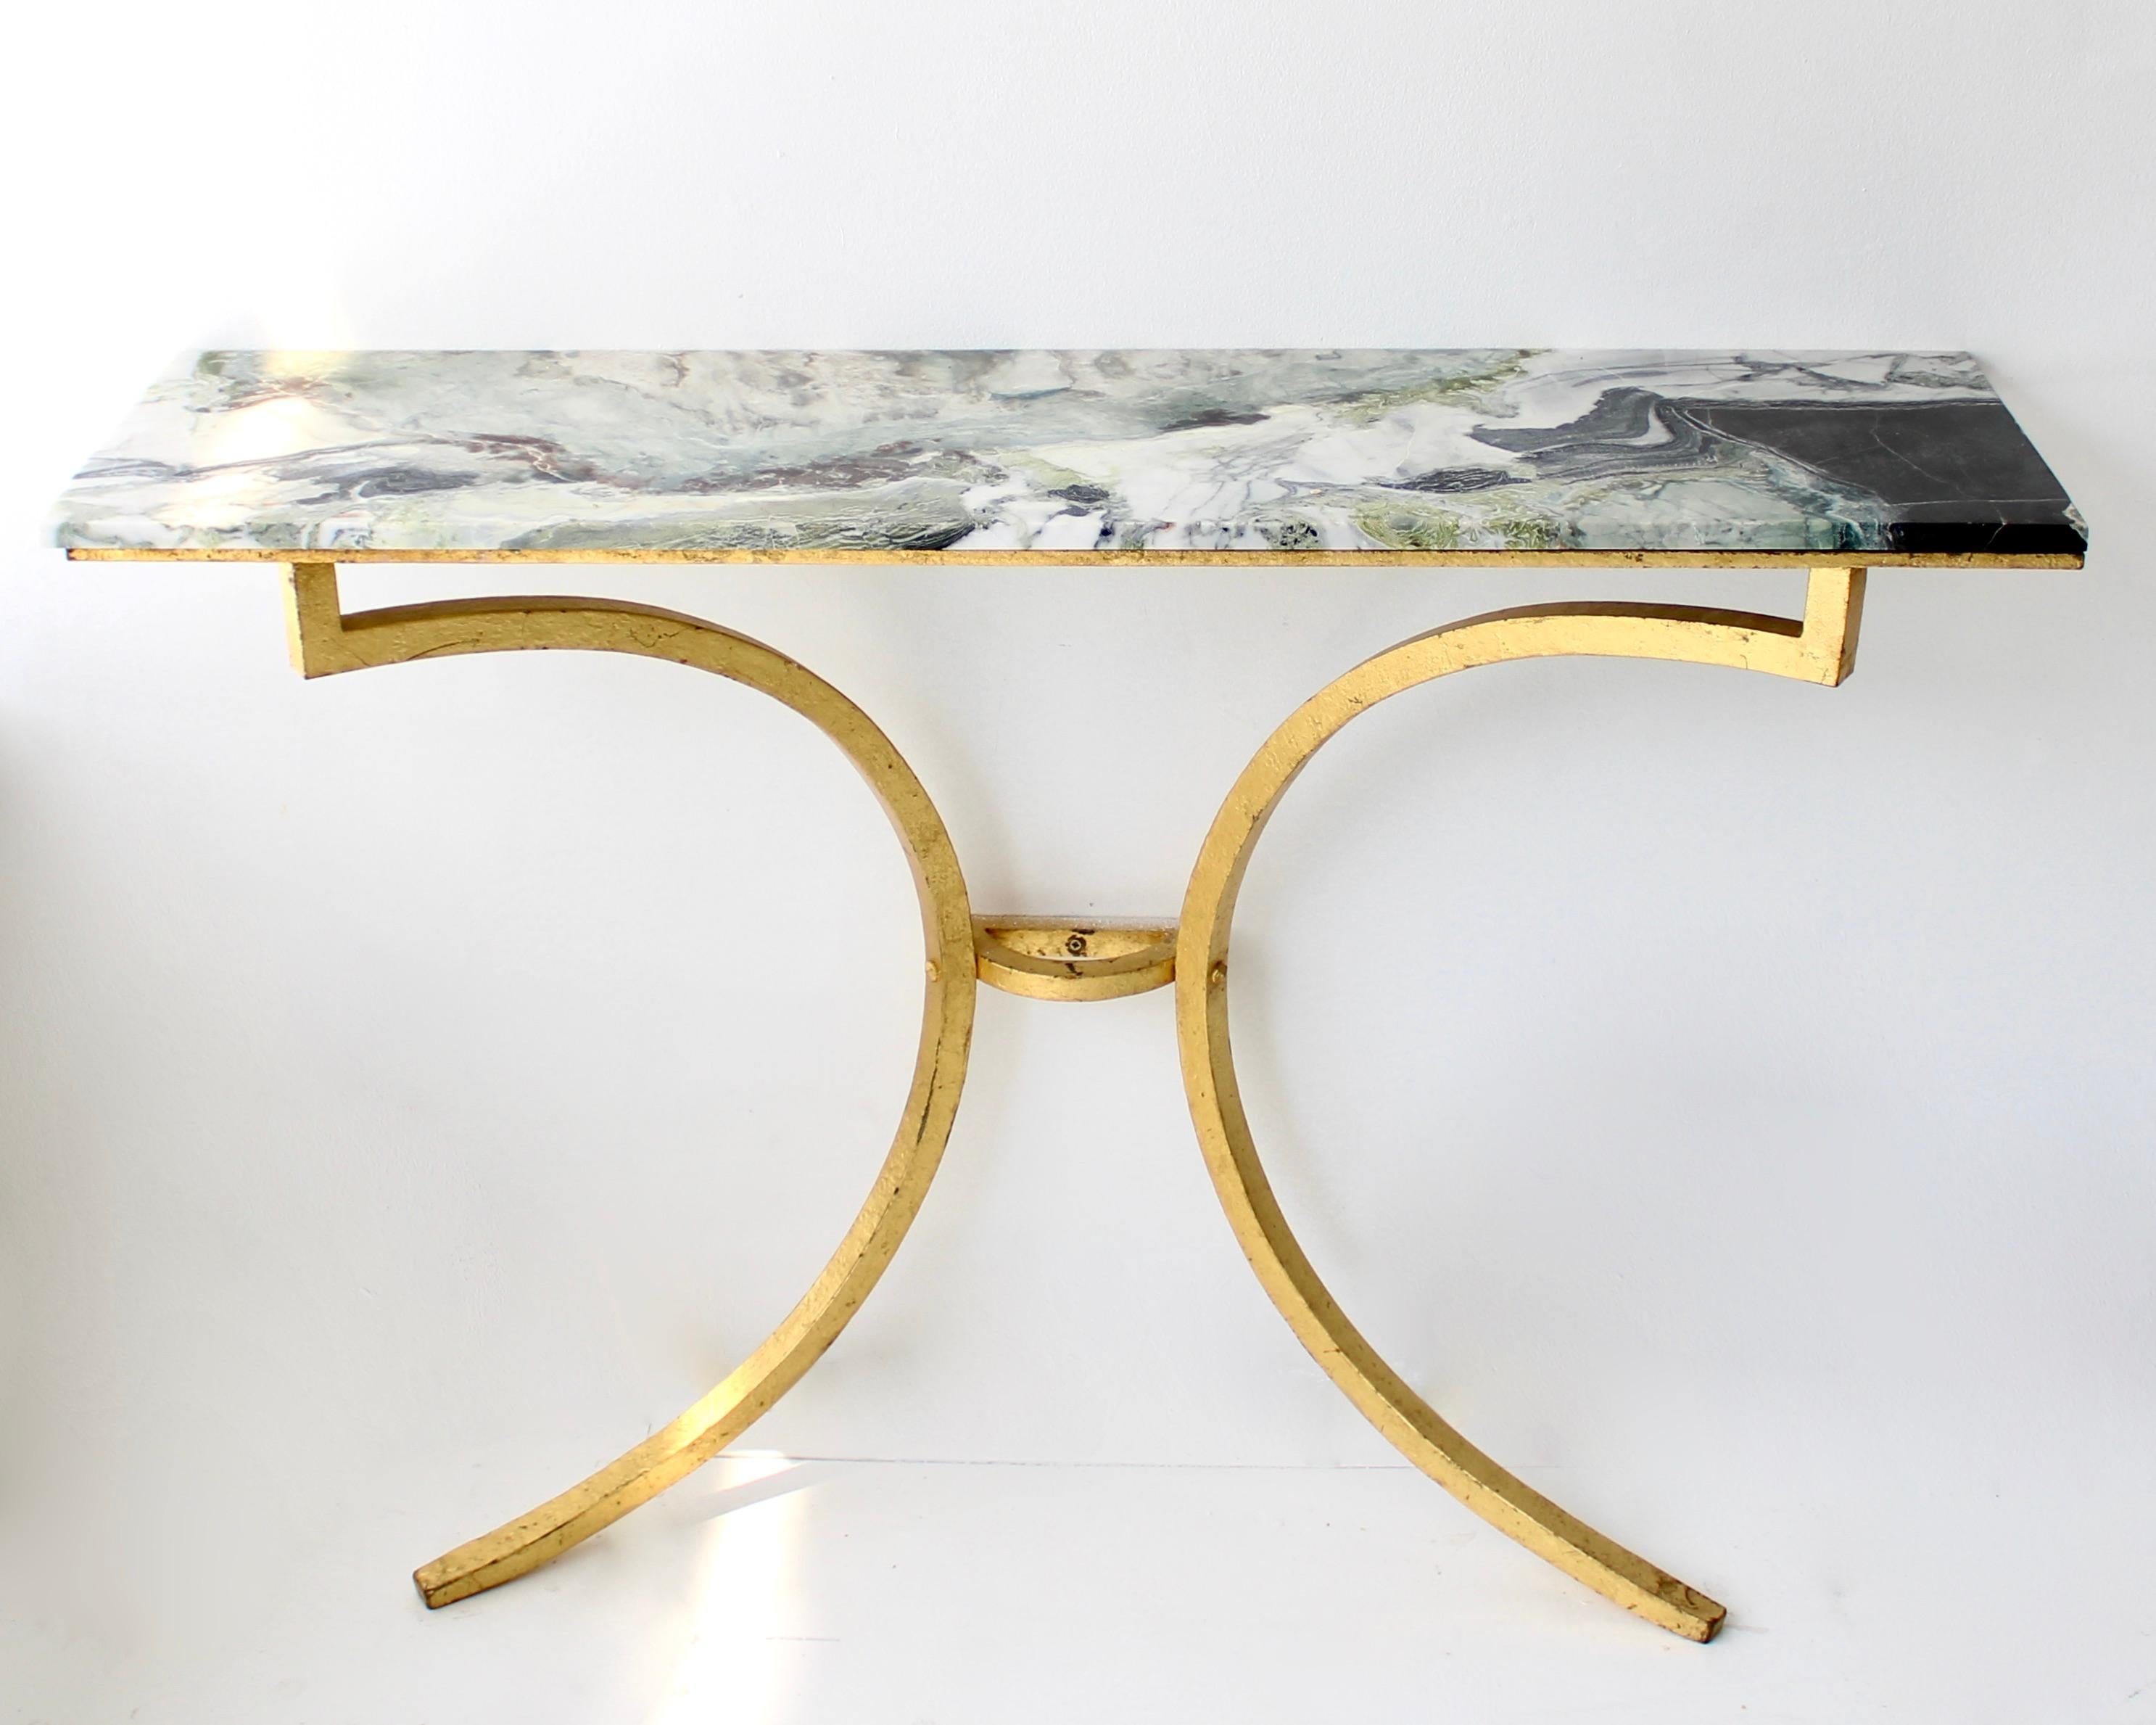 Rare French gilded iron console by Roger and Robert Thibier, circa 1960s. 
Wrought iron has been gilded with gold leaf for a gentle warm golden patina throughout the entire structure, including all the screws. French neoclassical /Mid-Century